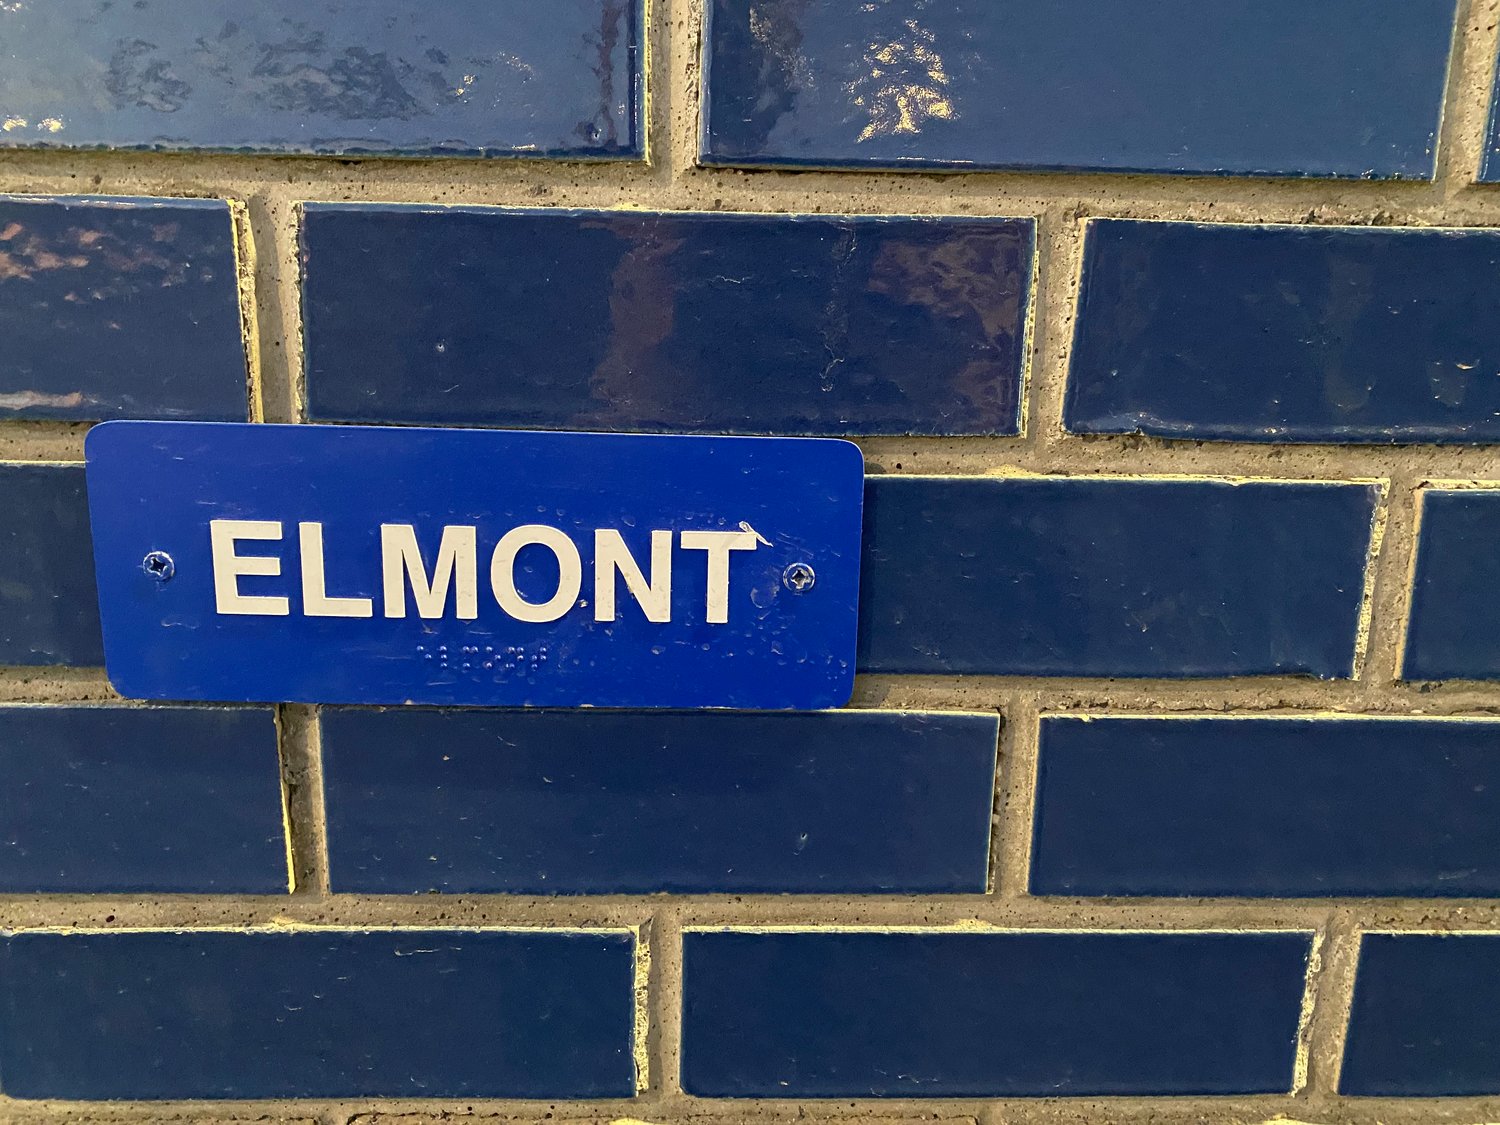 The new Elmont-UBS Arena Station, which is currently providing service only before and after events at the UBS Arena, is the first LIRR station to open in 50 years.